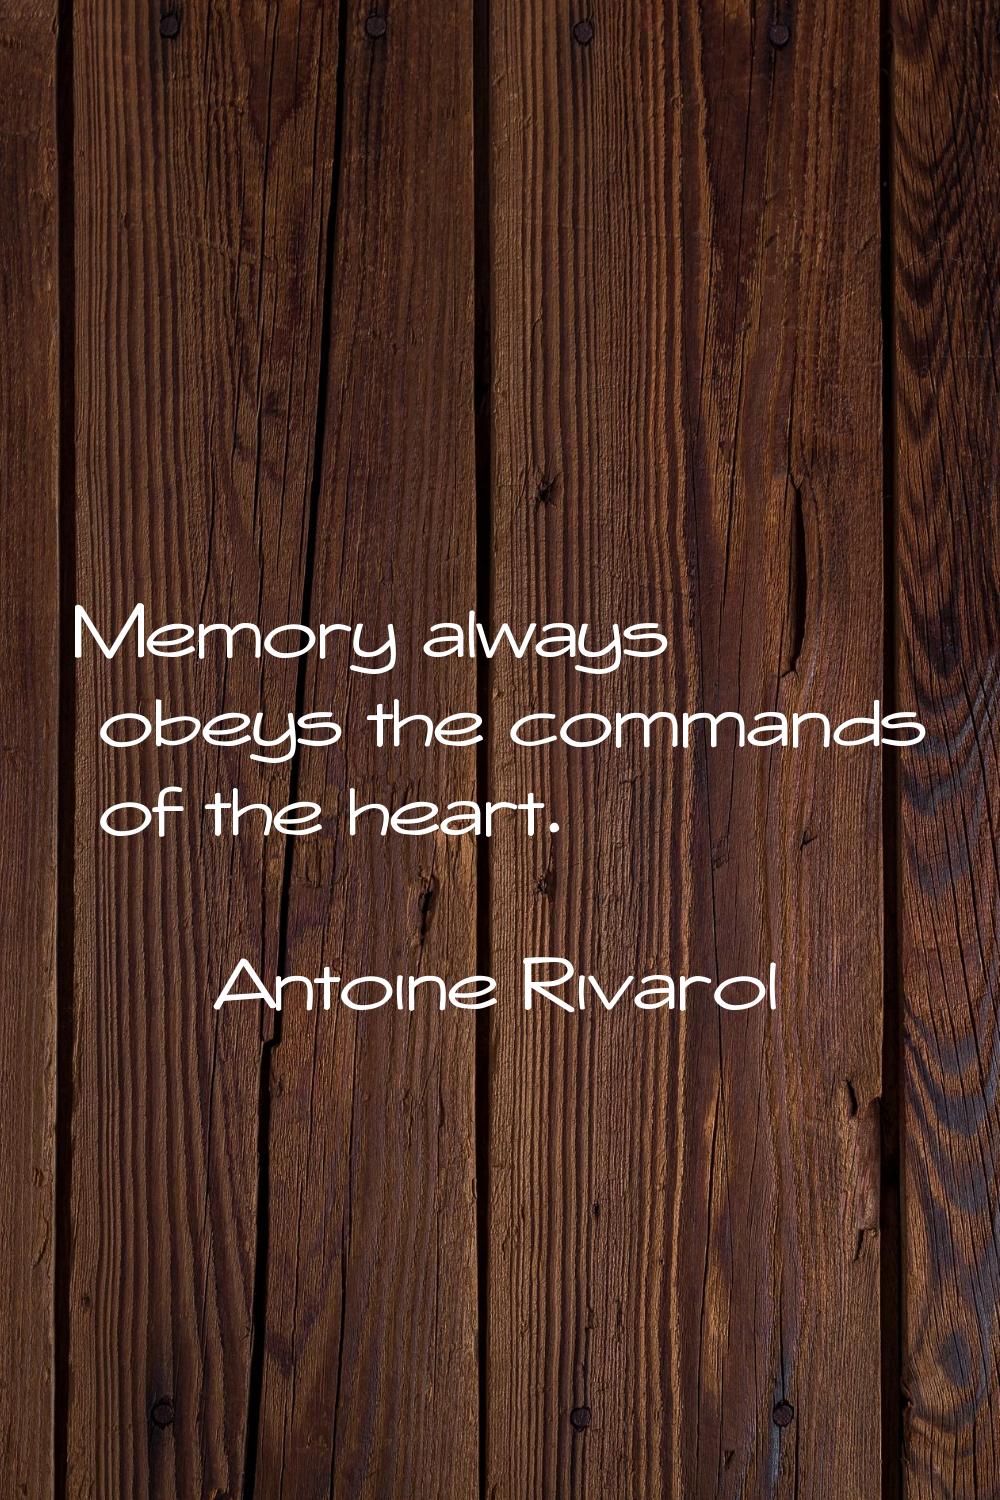 Memory always obeys the commands of the heart.